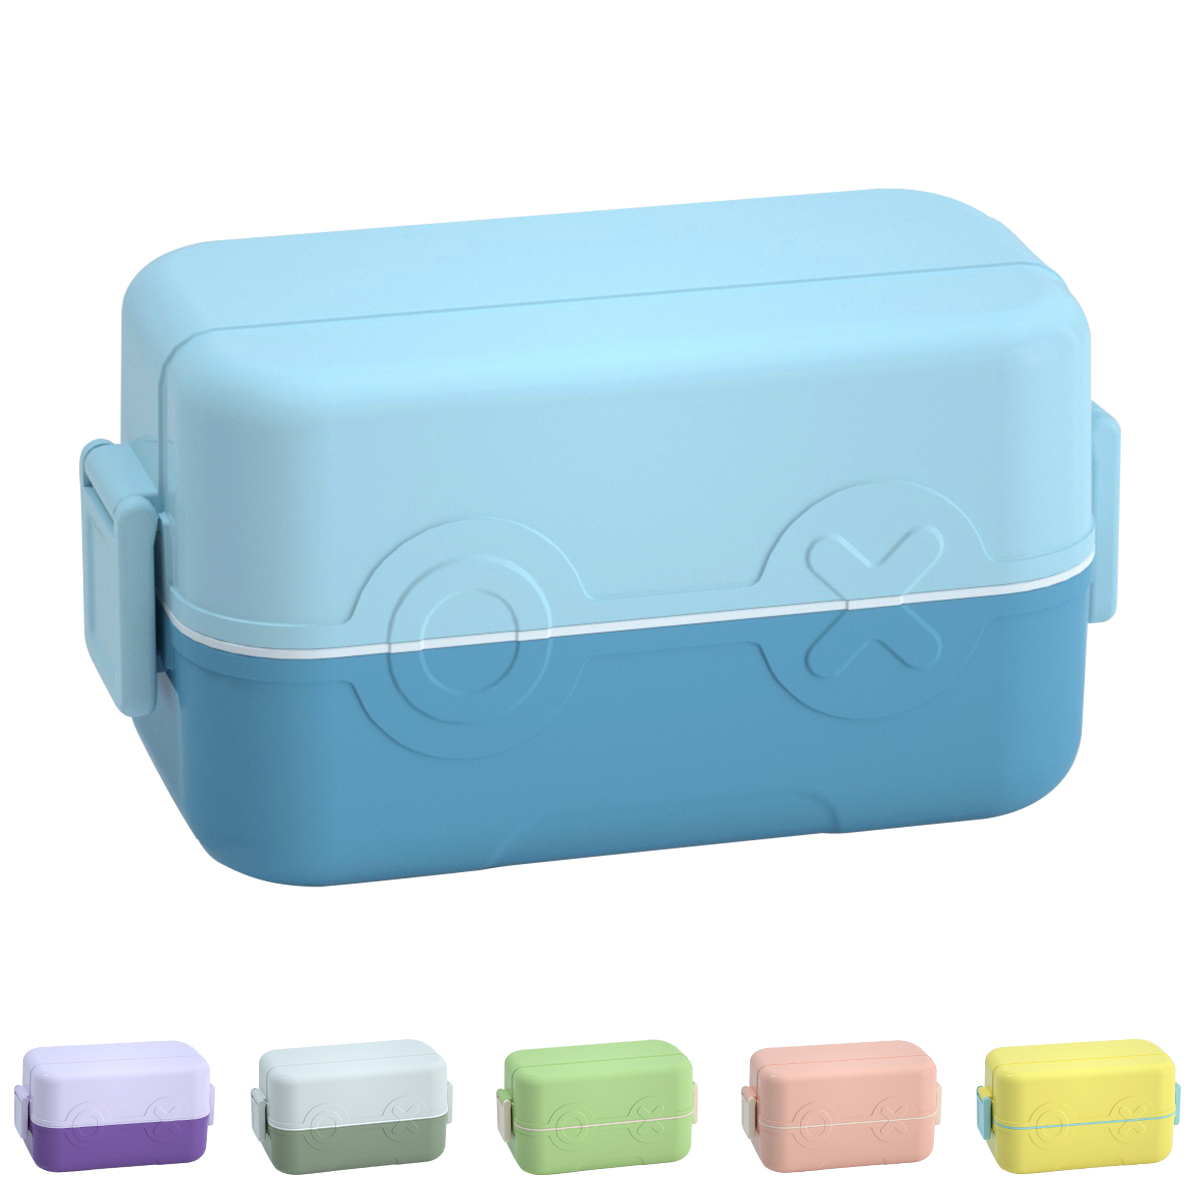 Double Layer Robot Bento Box For Kids Children With 4 Compartment, Portable Plastic Lunch Box BPA Free